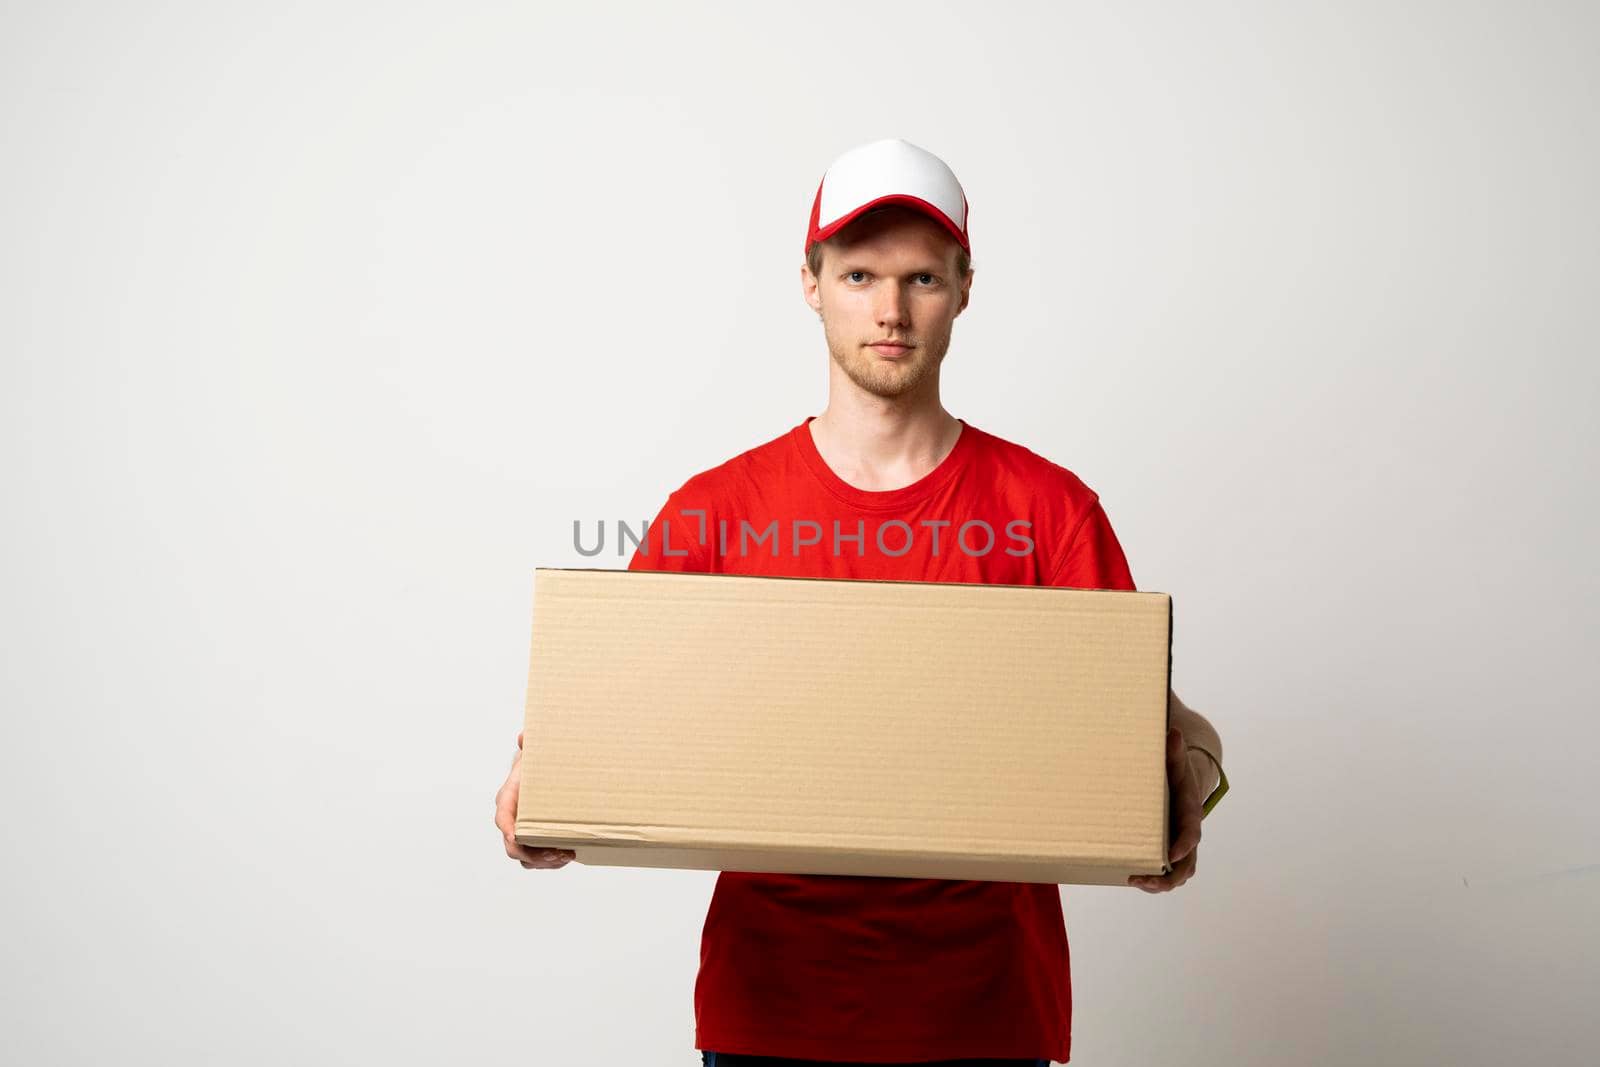 Delivery service. Young smiling courier holding cardboard box. Happy young delivery man in cap and red t-shirt standing with parcel isolated on white background